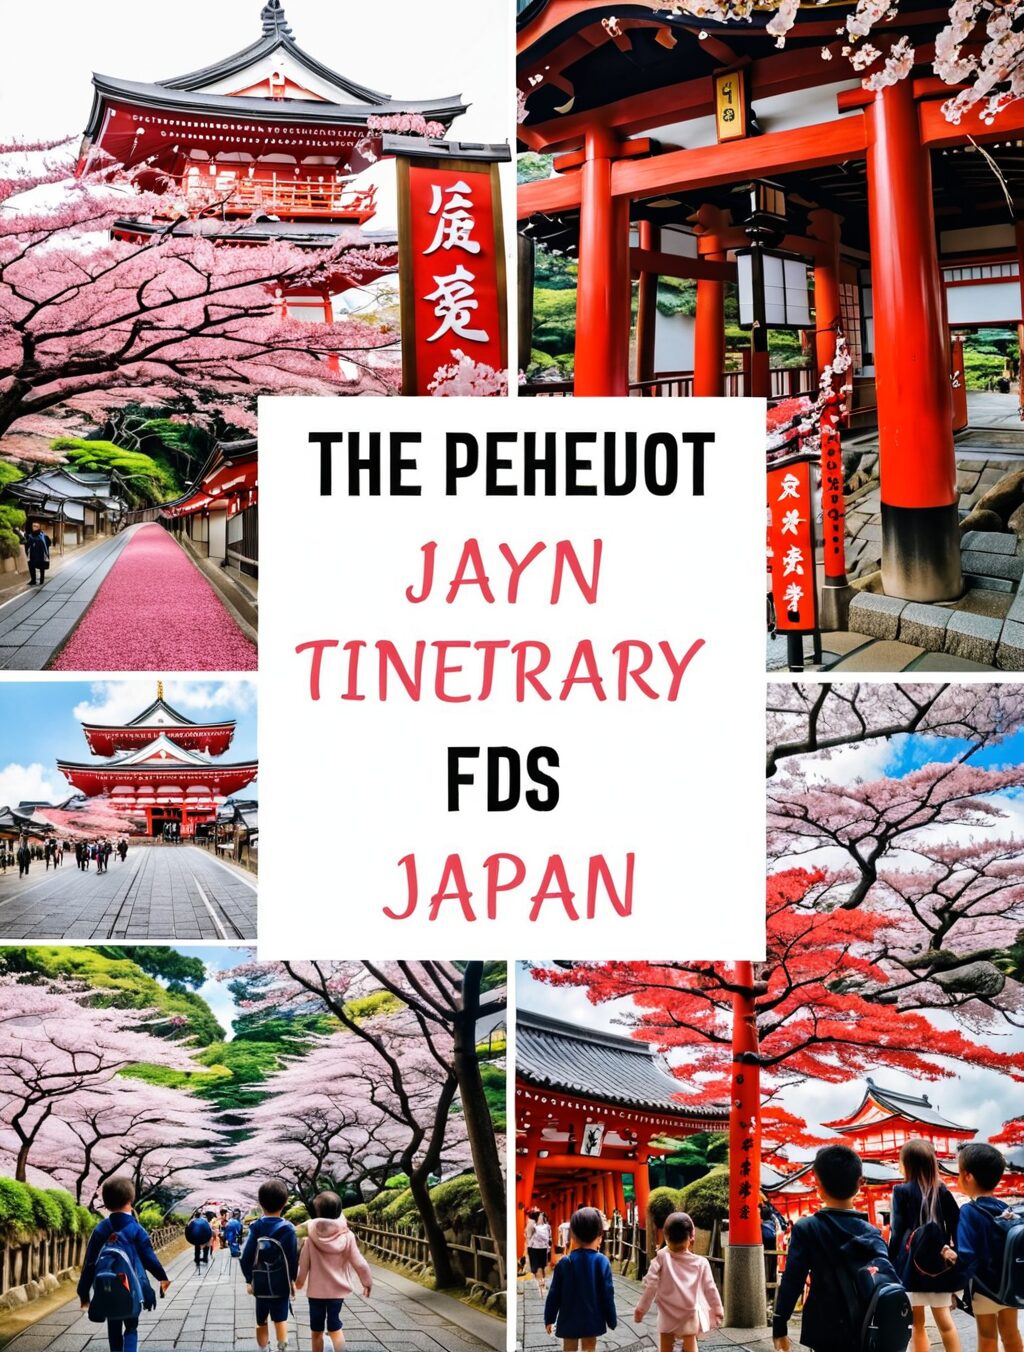 7 day itinerary japan with kids